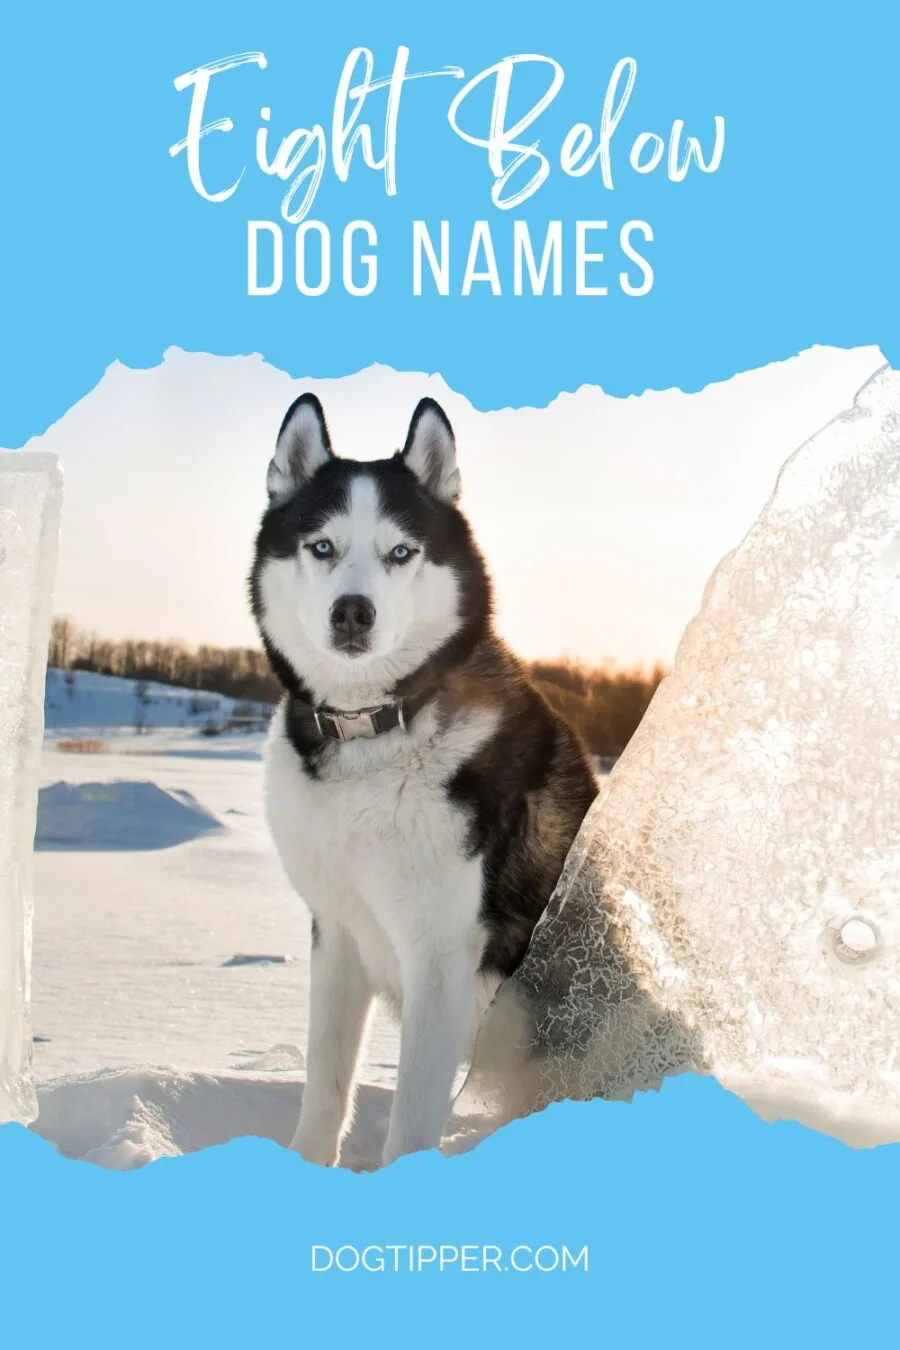 Photo of Siberian Husky for post on the dog names of the Eight Below movie